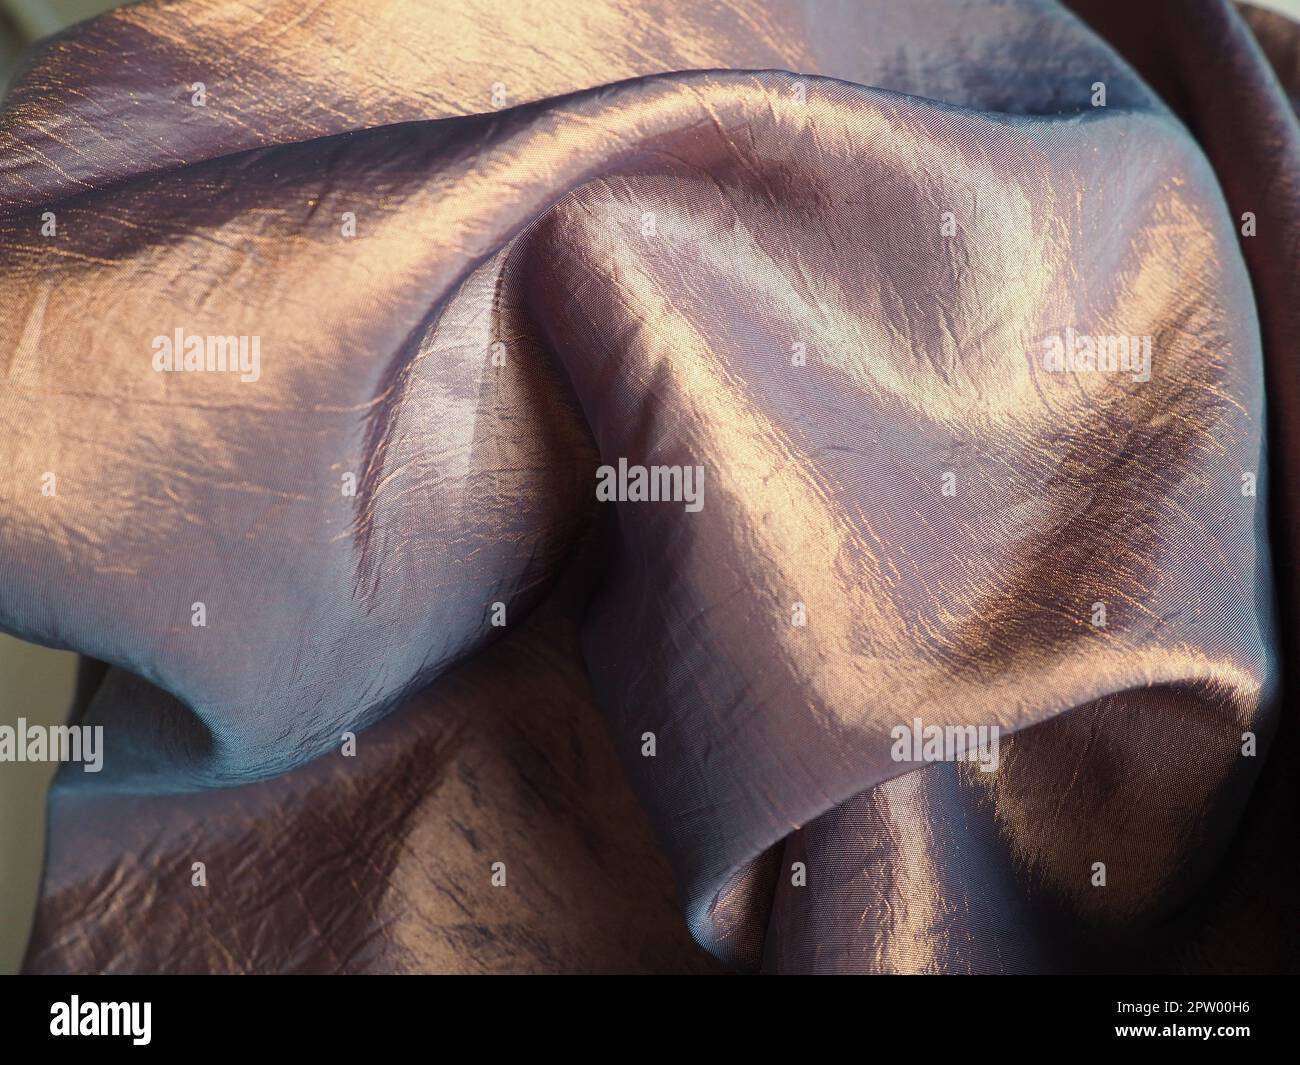 Beautiful fabric - taffeta, gently folded in waves. Crumpled material that looks like silk or brocade. Overflow and color gradient at different lighti Stock Photo